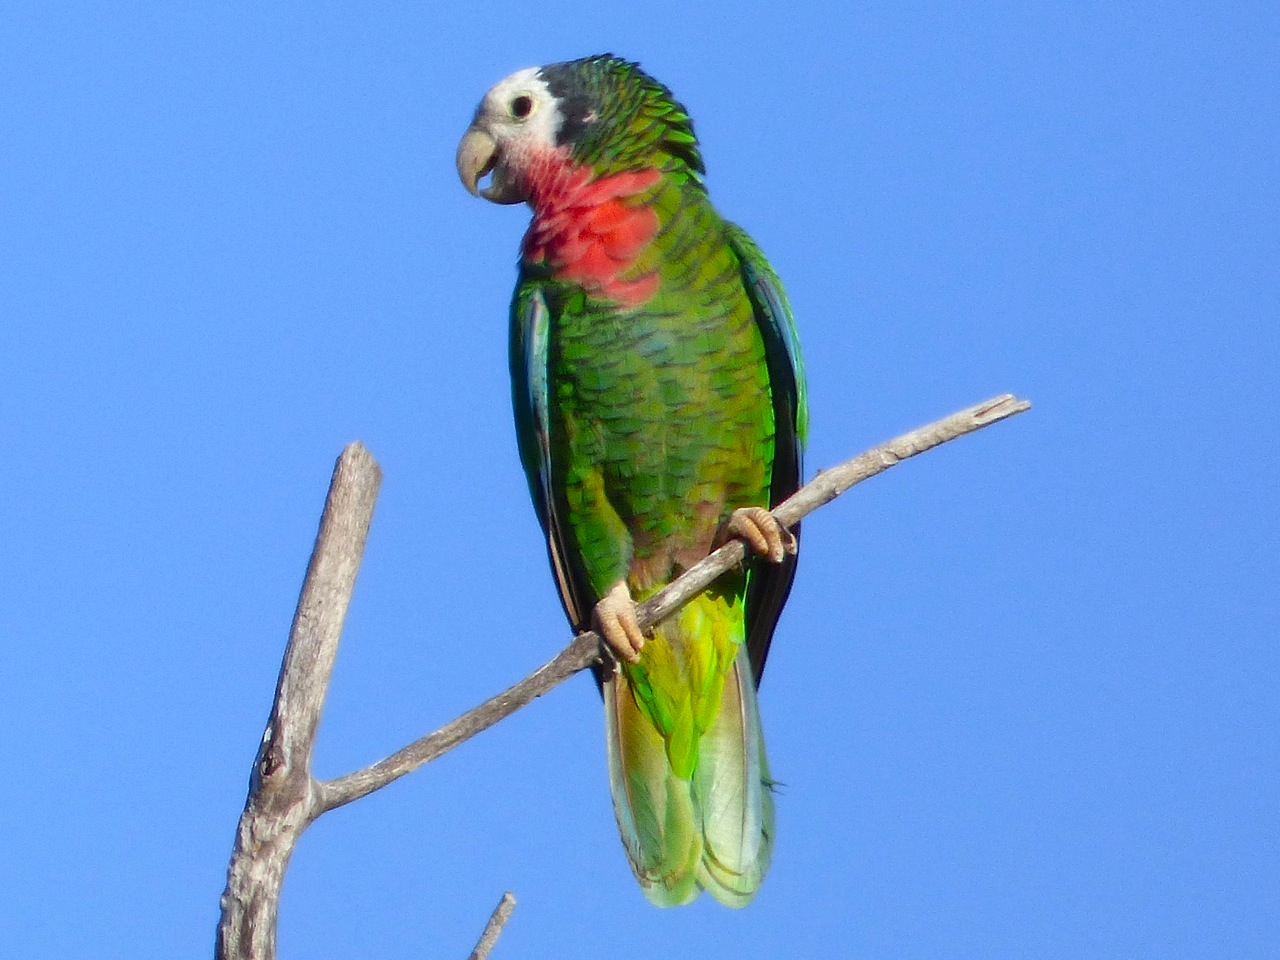 Abaco Parrot 12:15